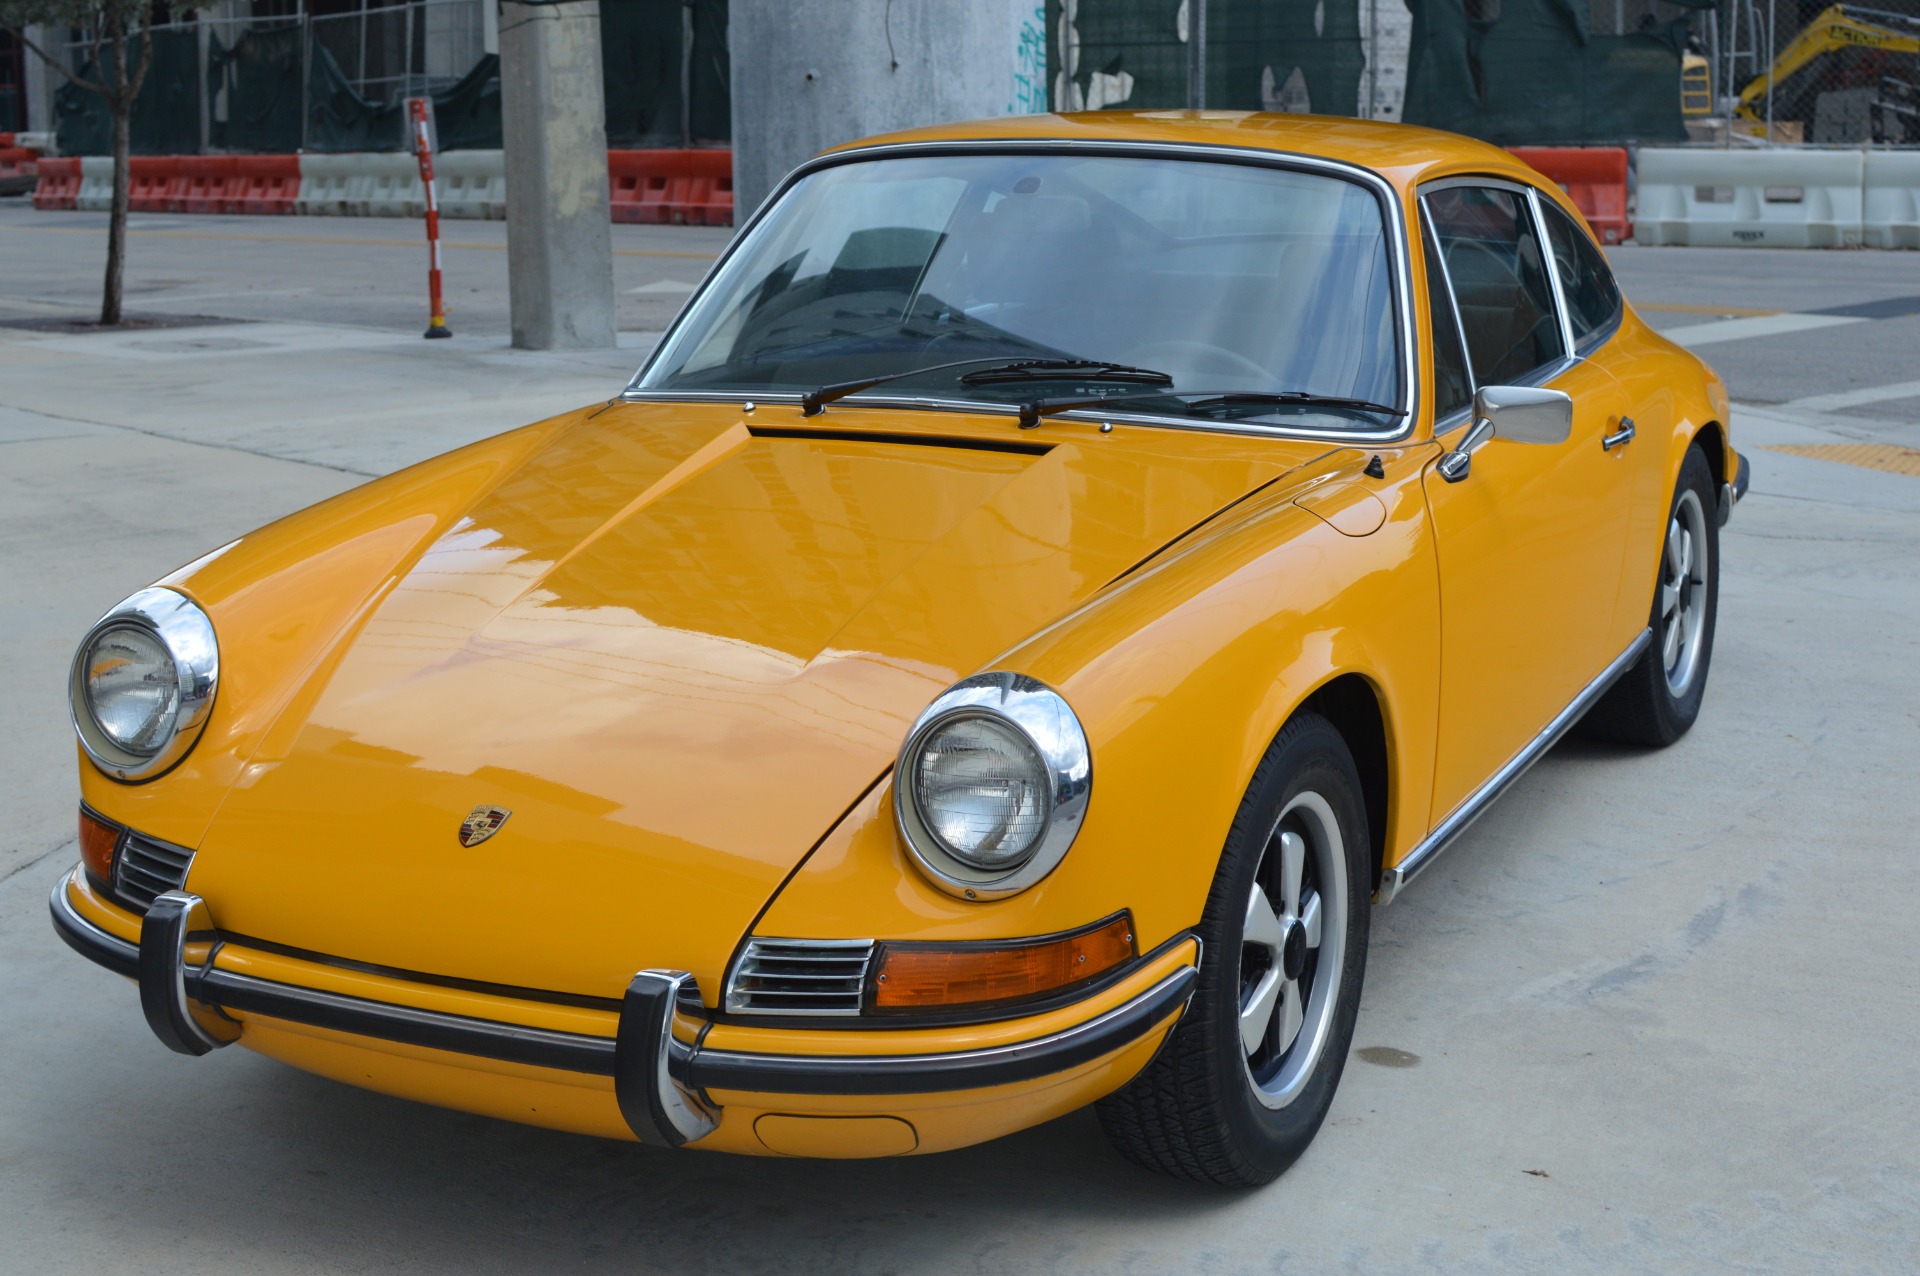 Used 1972 Porsche 911 T For Sale 69999 Vertex Auto Group Stock 72yellow911coupe